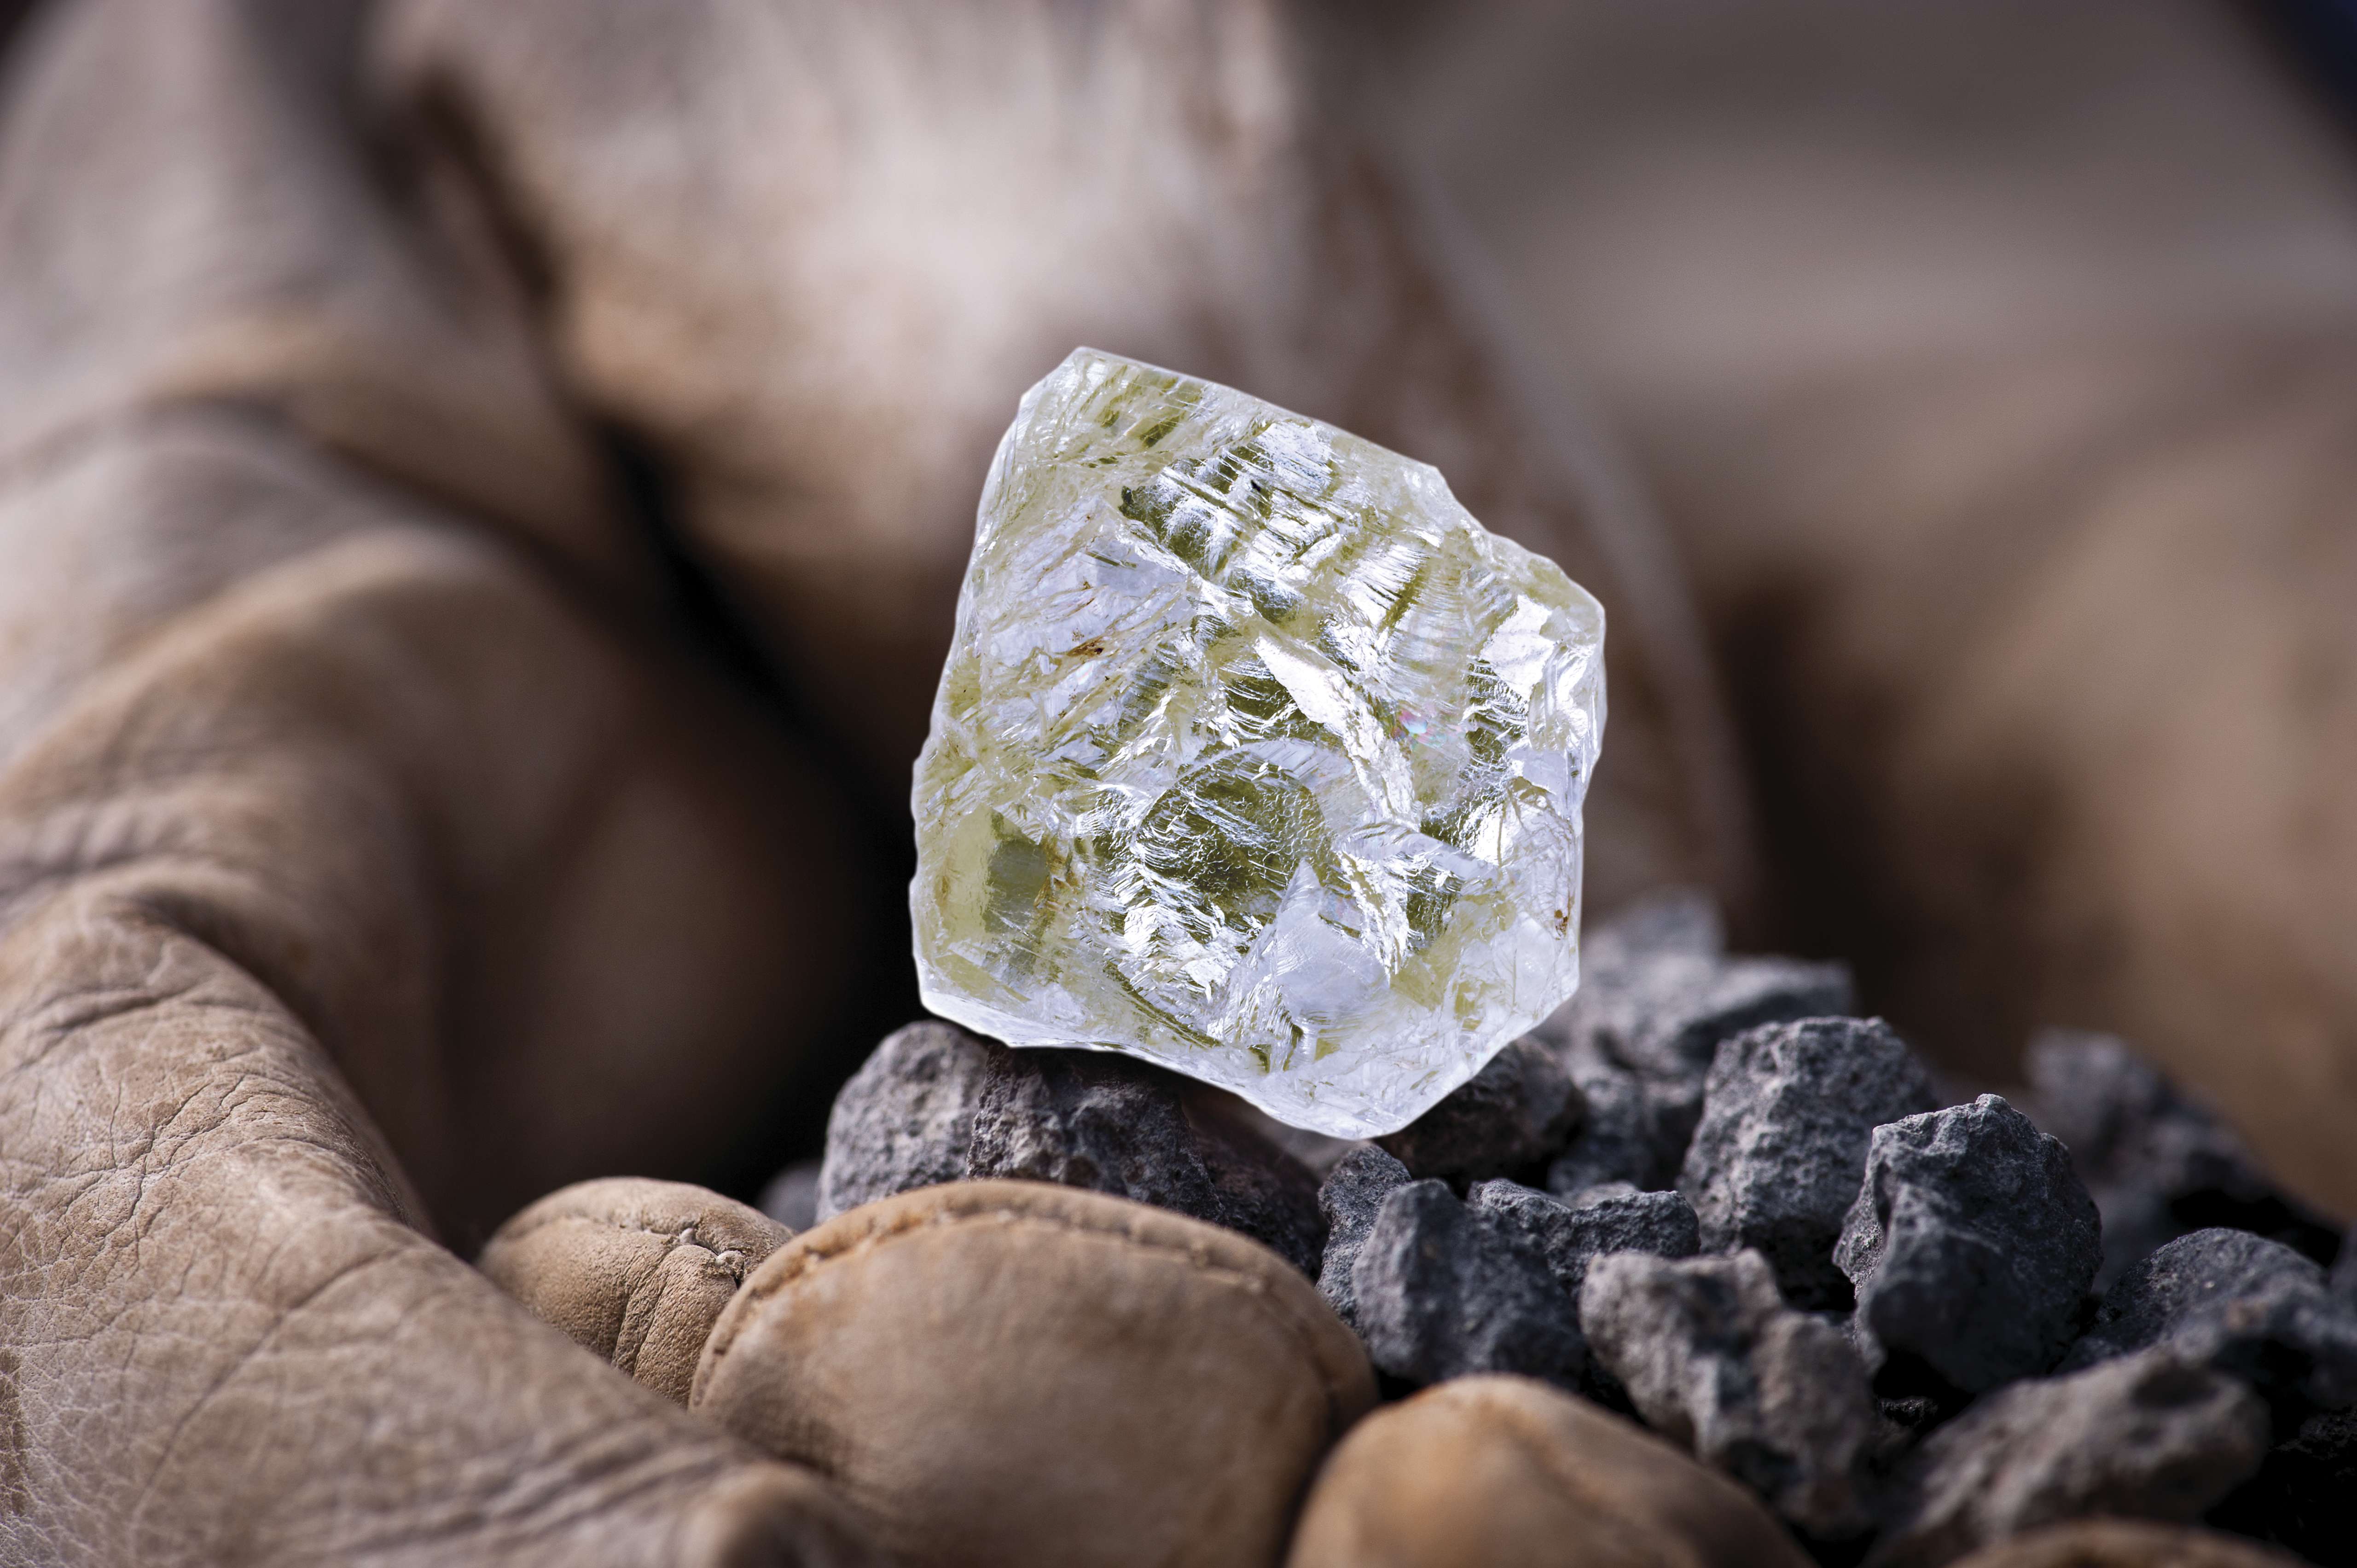 The 187.7ct Diavik Foxfire diamond was discovered in the remote Northwest Territories of Canada.